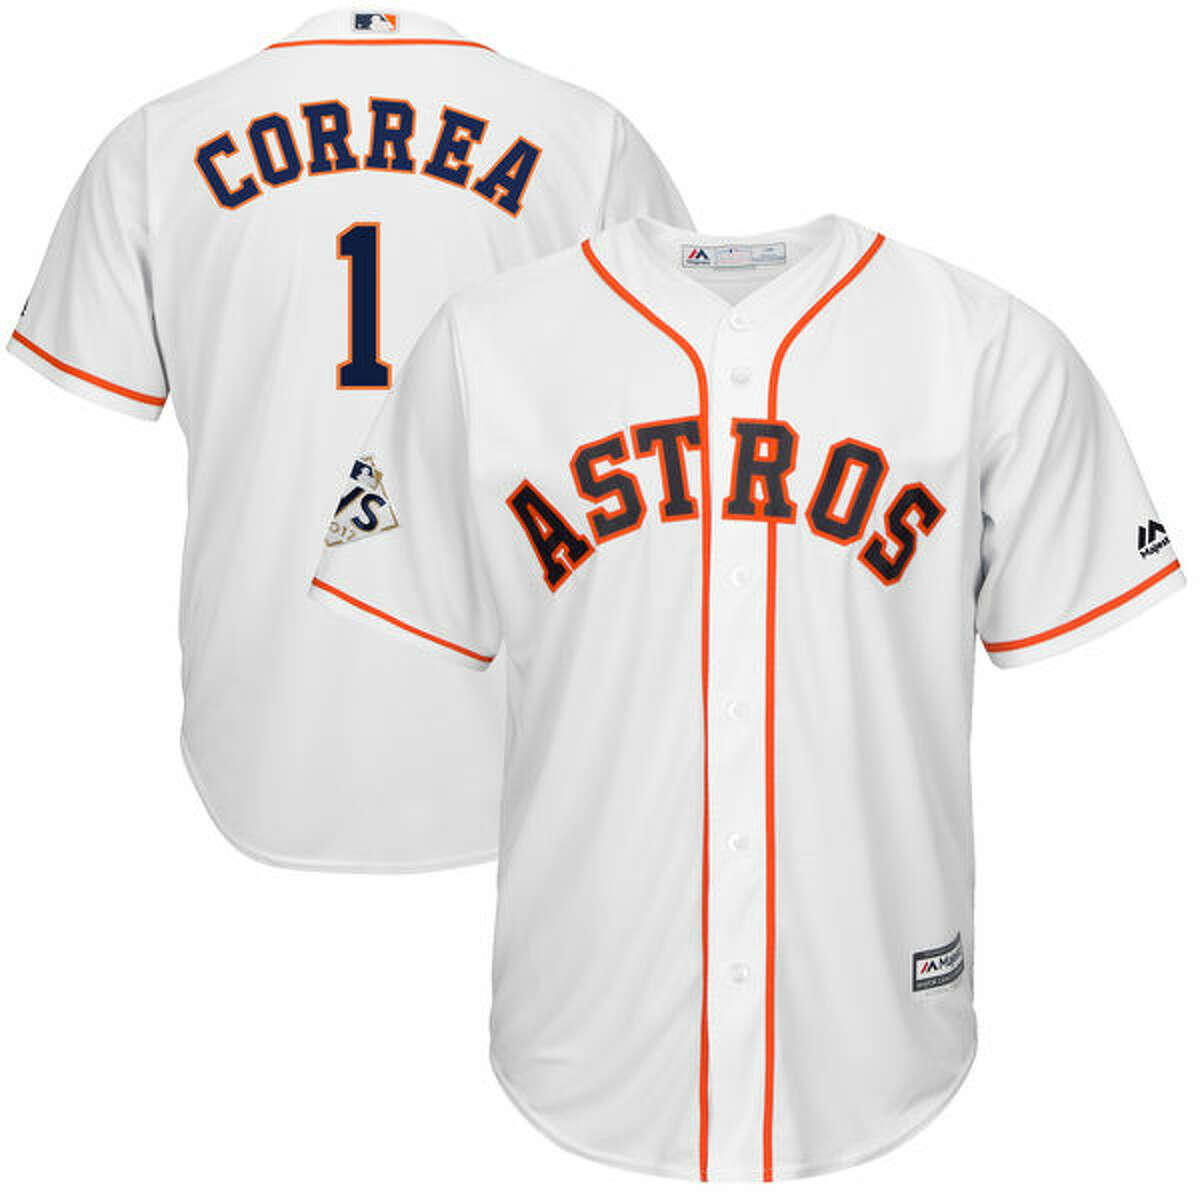 Here's what Astros' World Series merchandise looks like